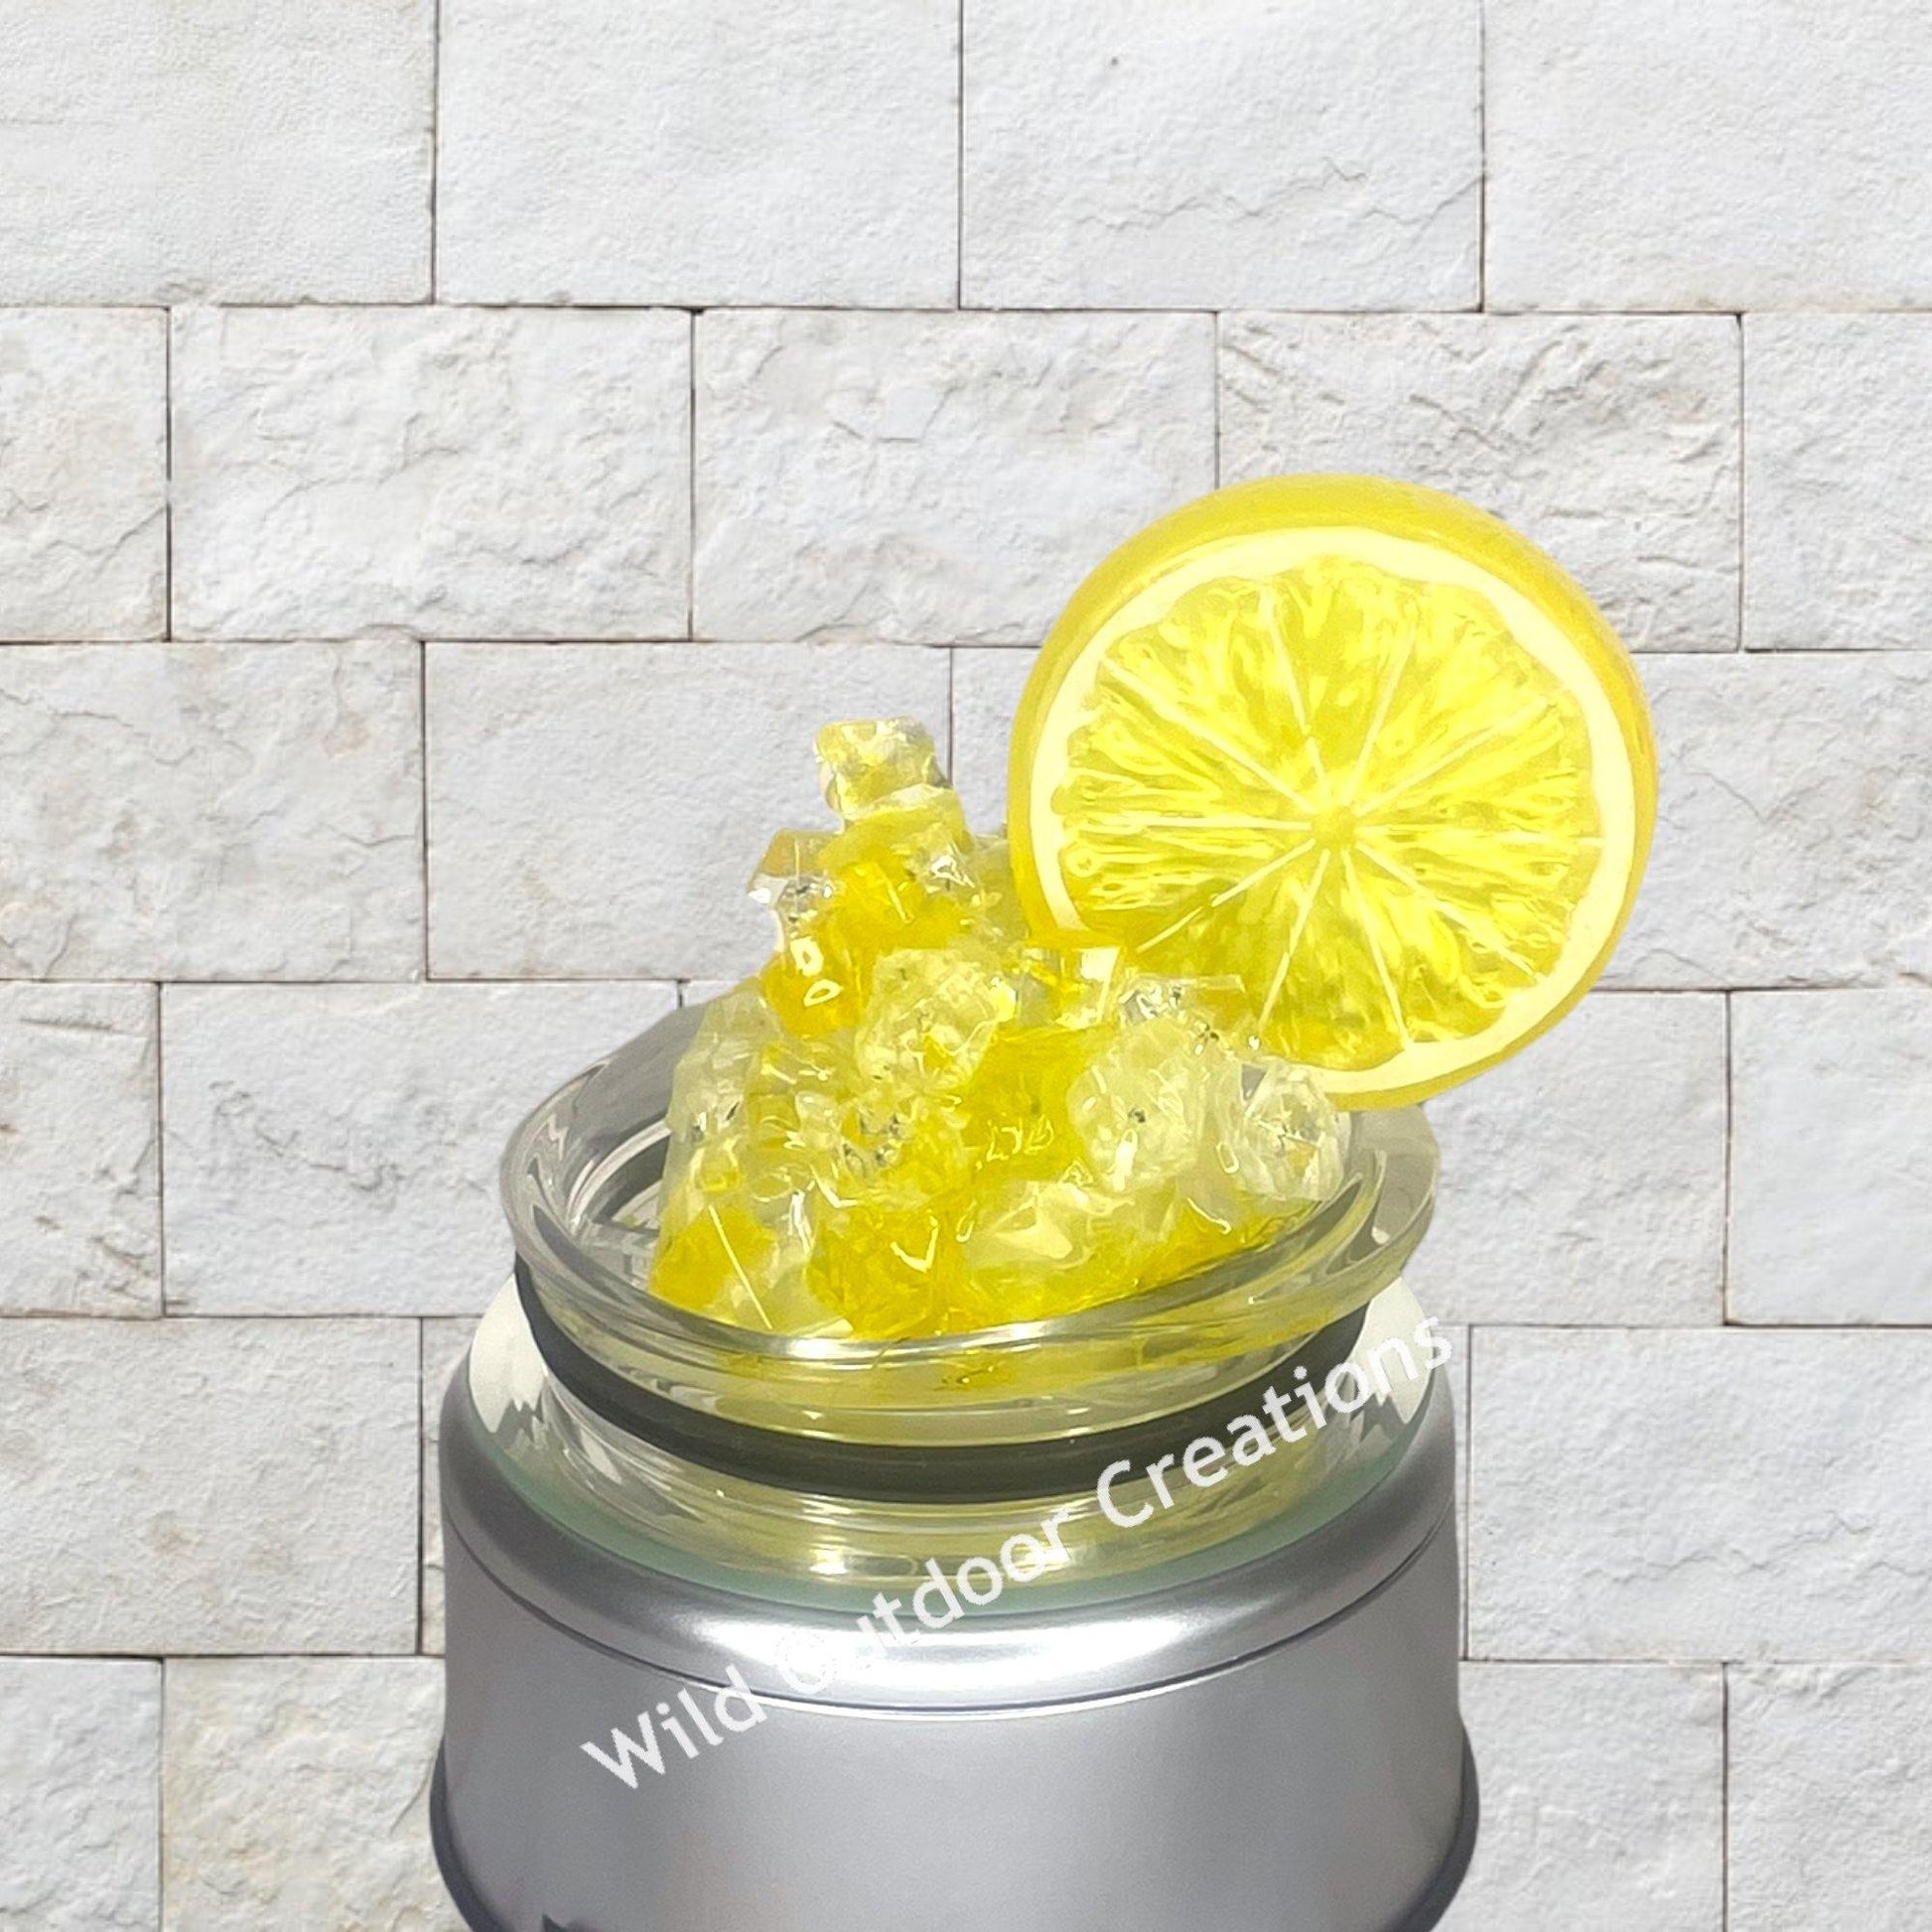 When Life Gives You Lemons Tumbler, Vodka Tumbler, Water Bottle w Lid and Straw, Ice Topped Tumbler - Wild Outdoor Creations